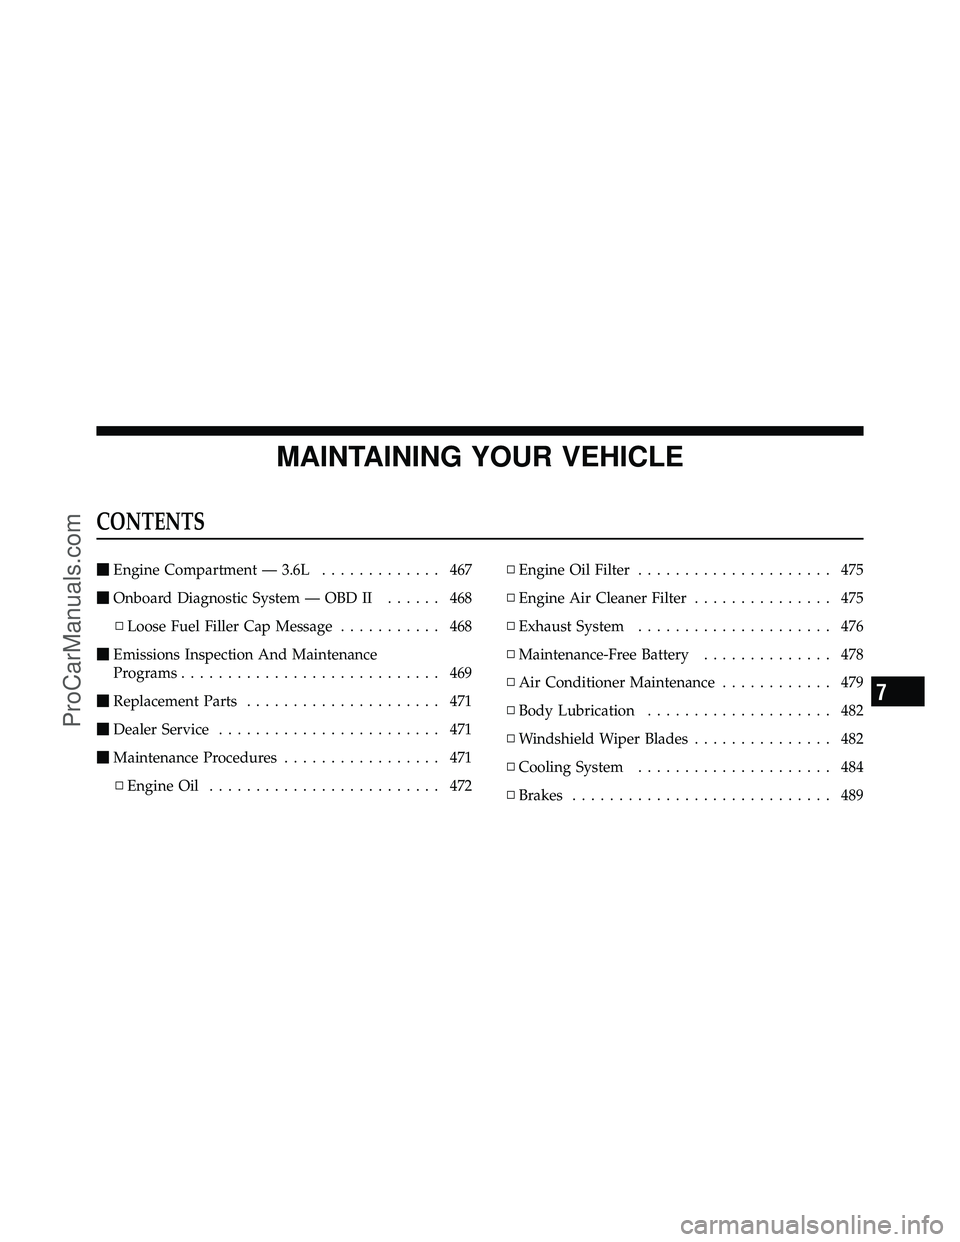 DODGE CARAVAN 2011  Owners Manual MAINTAINING YOUR VEHICLE
CONTENTS
Engine Compartment — 3.6L ............. 467
 Onboard Diagnostic System — OBD II ...... 468
▫ Loose Fuel Filler Cap Message ........... 468
 Emissions Inspect